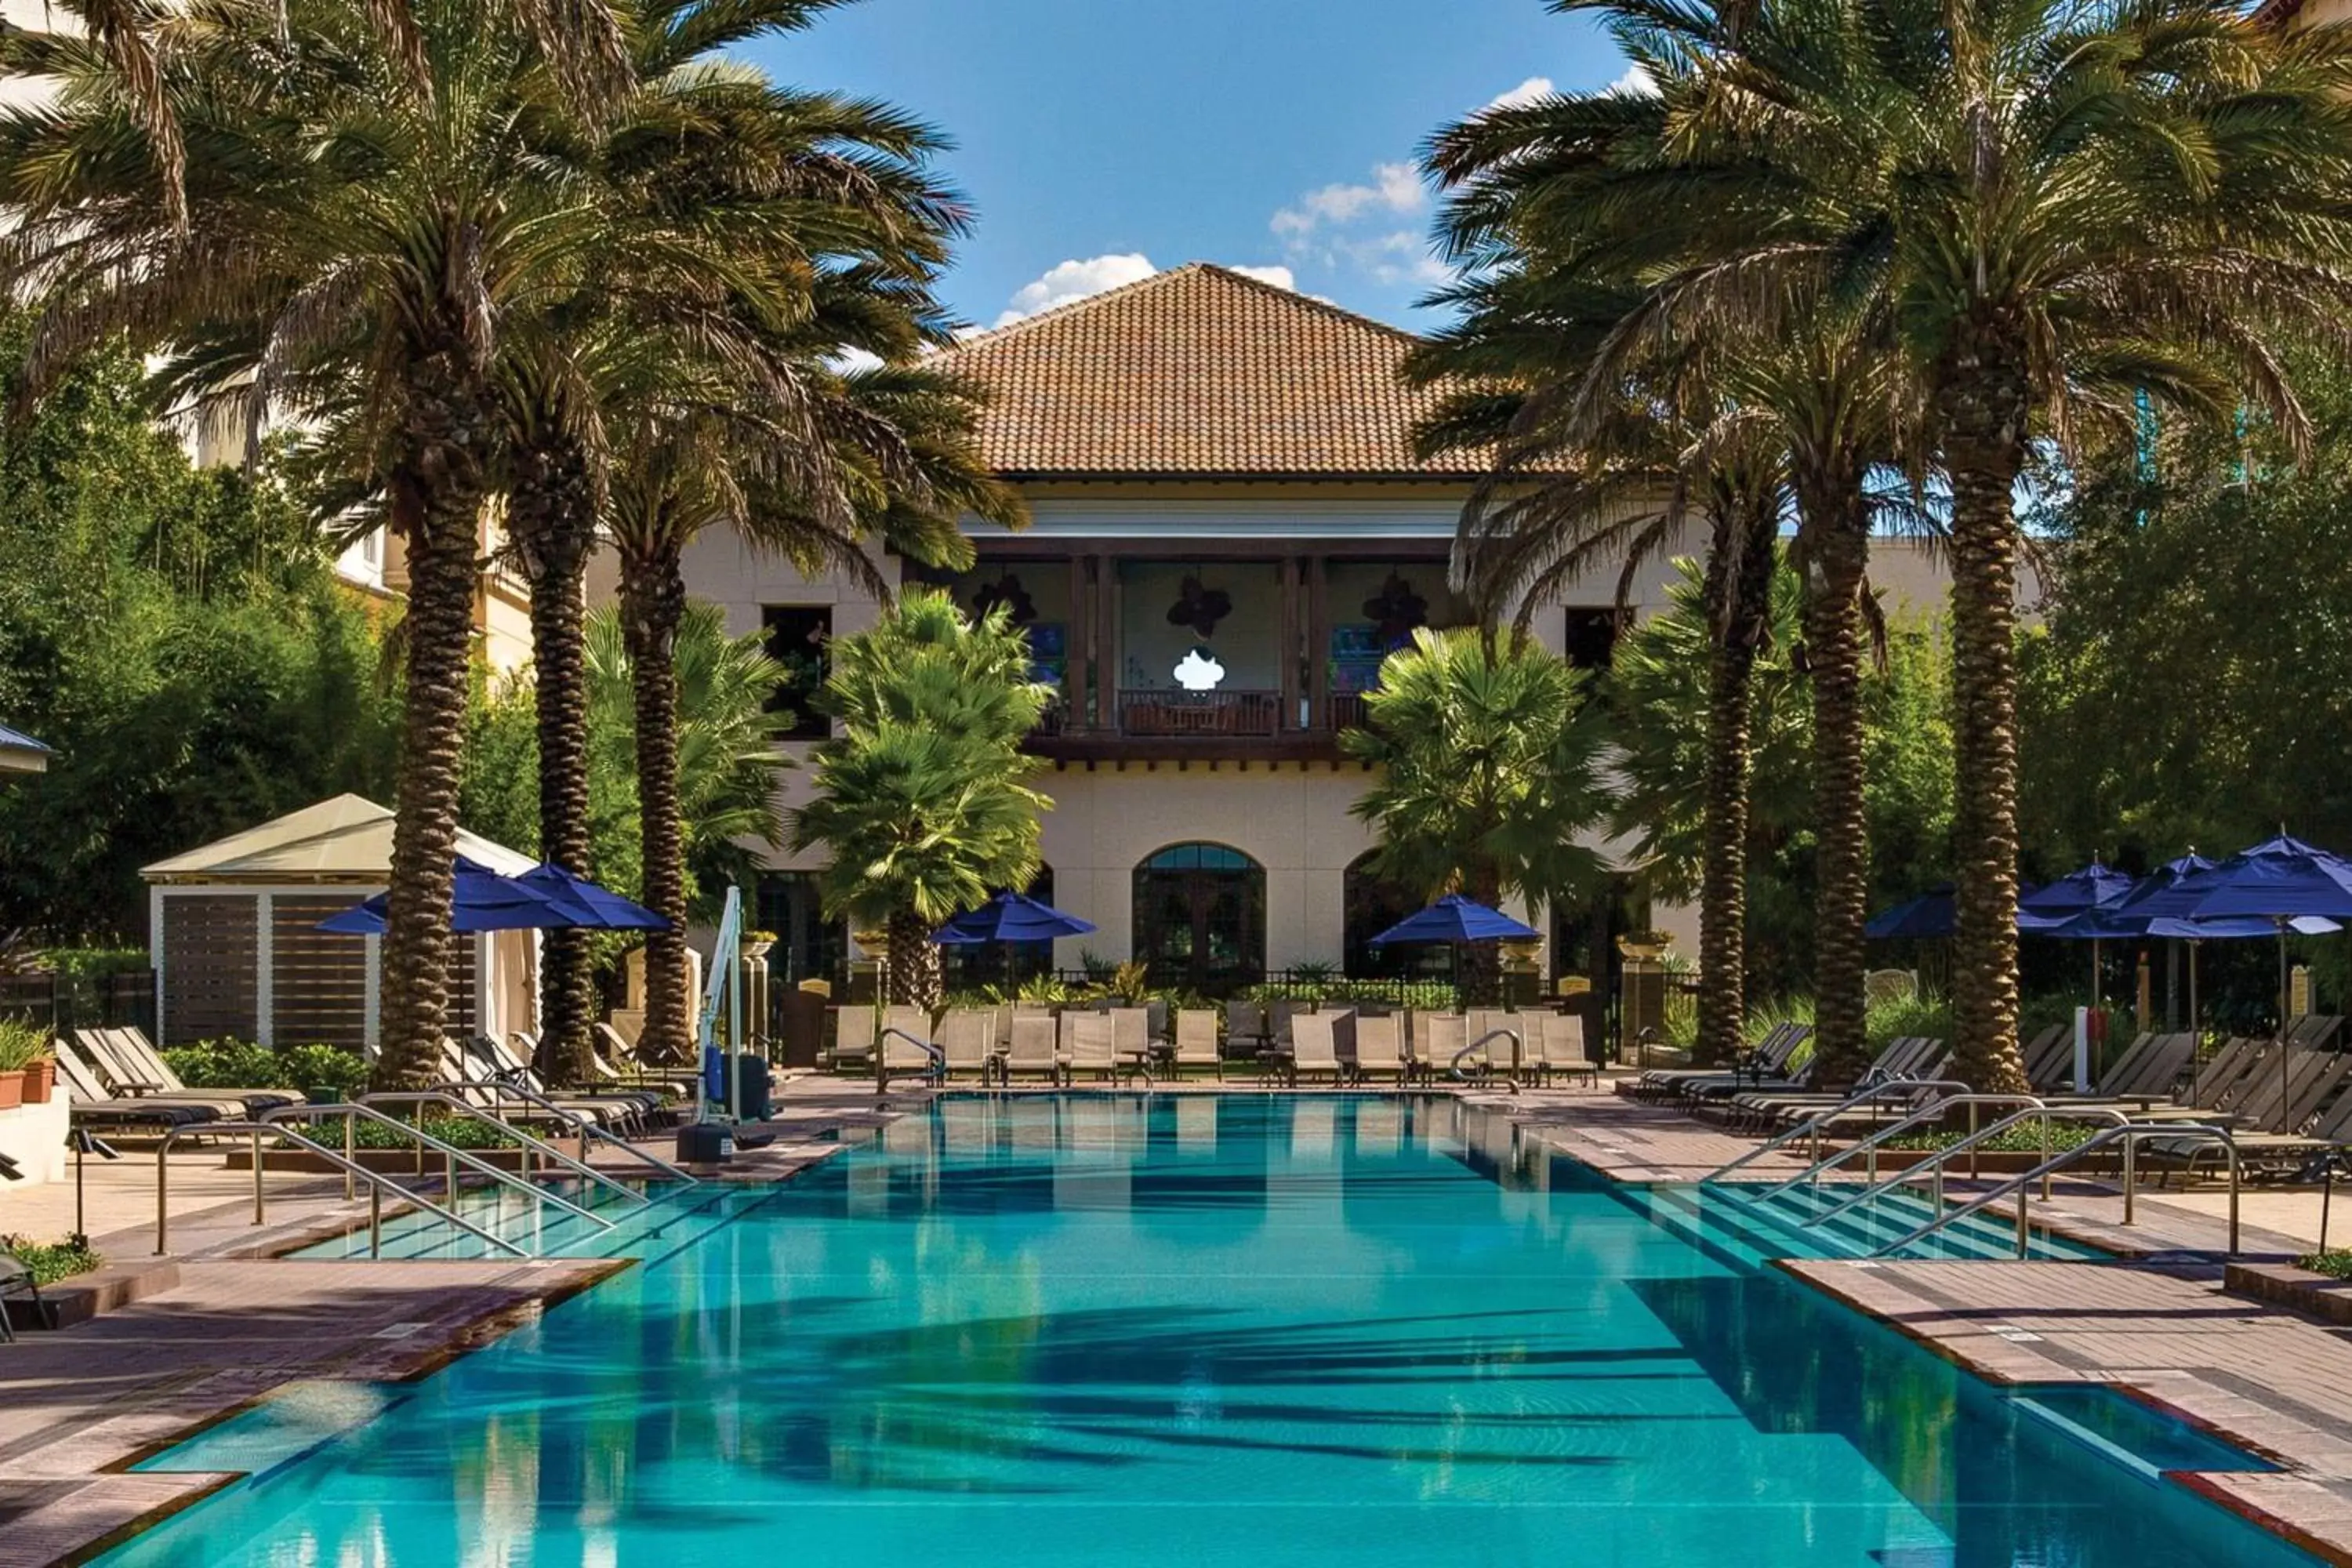 Swimming Pool in Gaylord Palms Resort & Convention Center